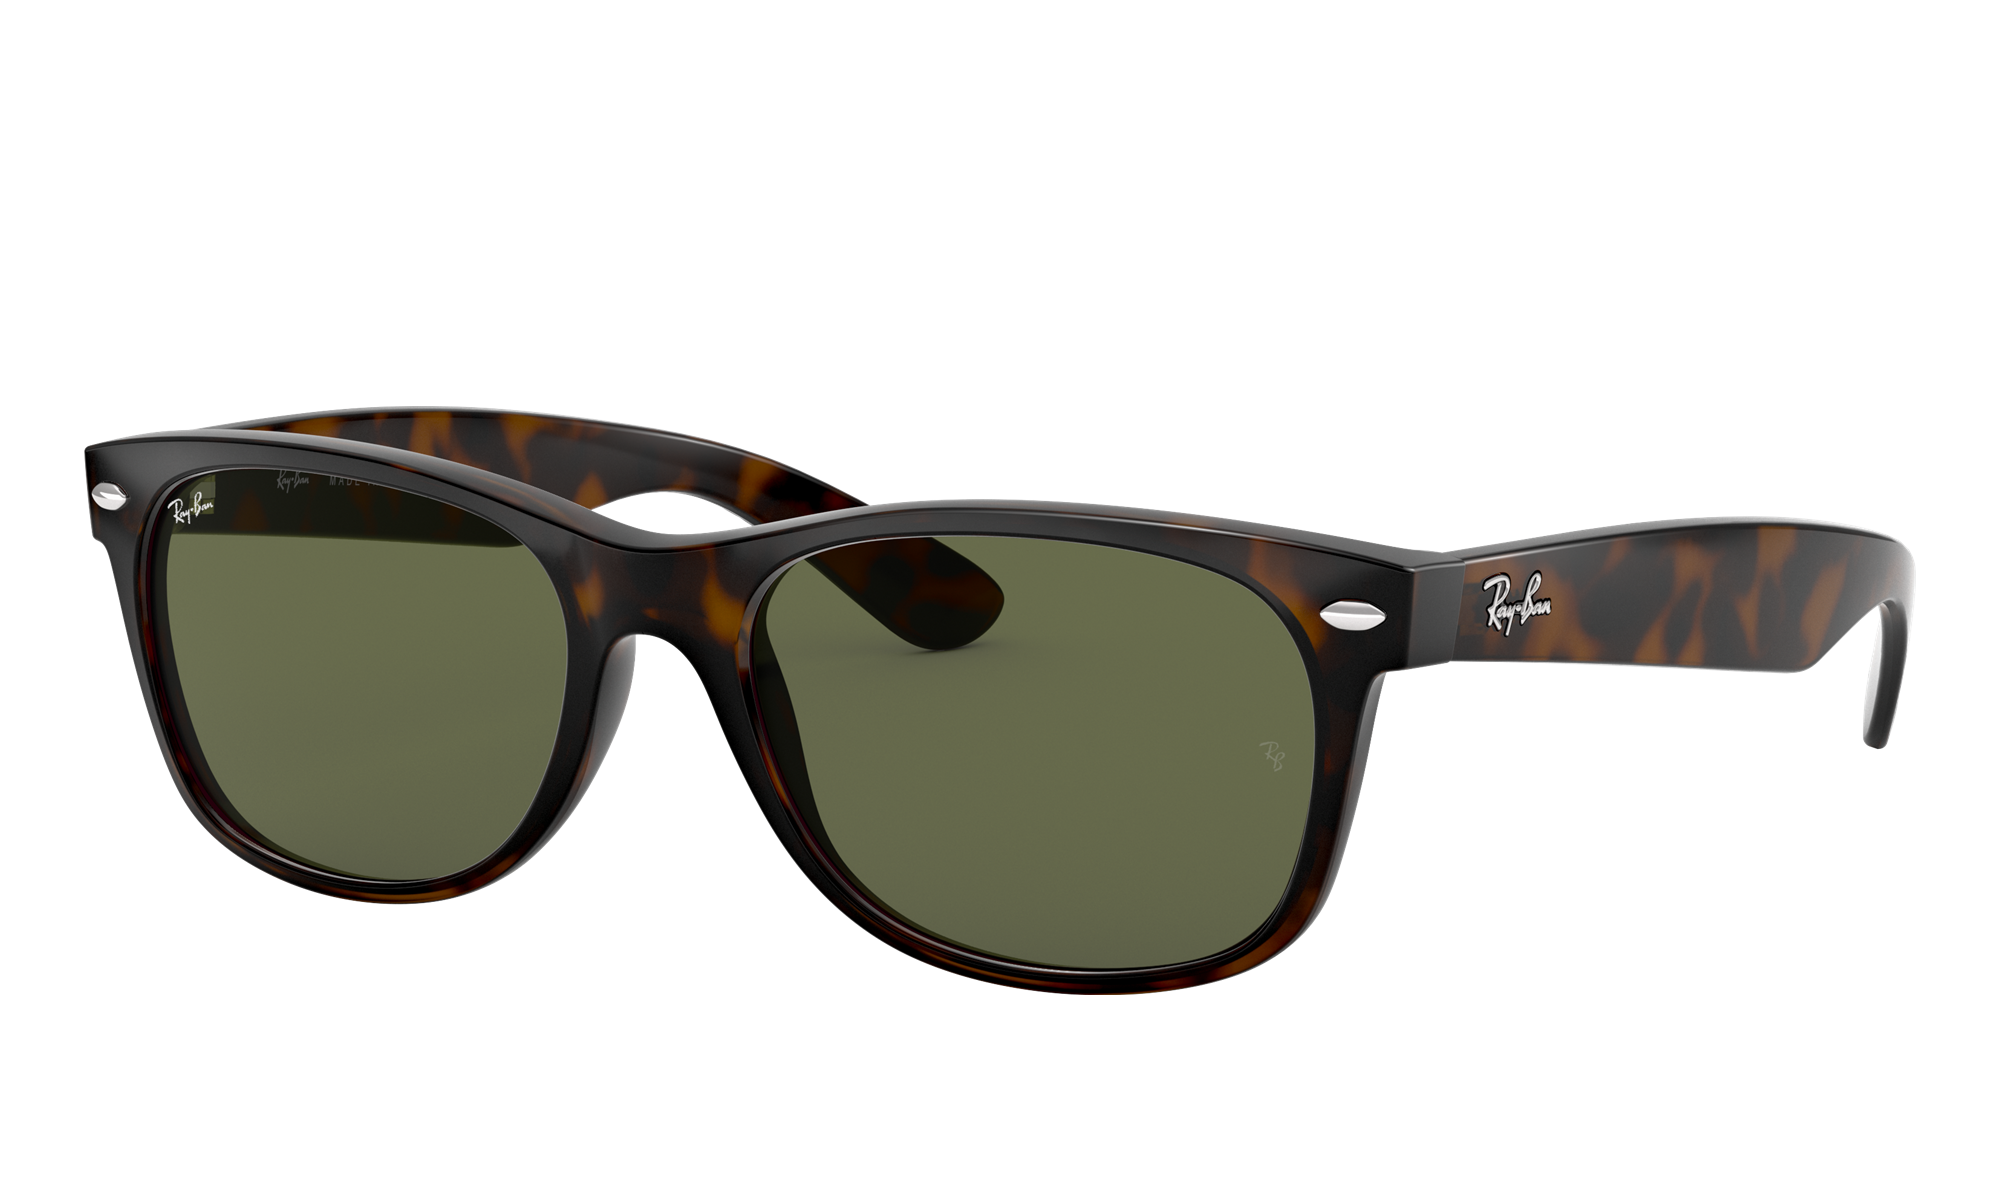 Ray-Ban Unisex Rb2132 Tortoise Size: Small